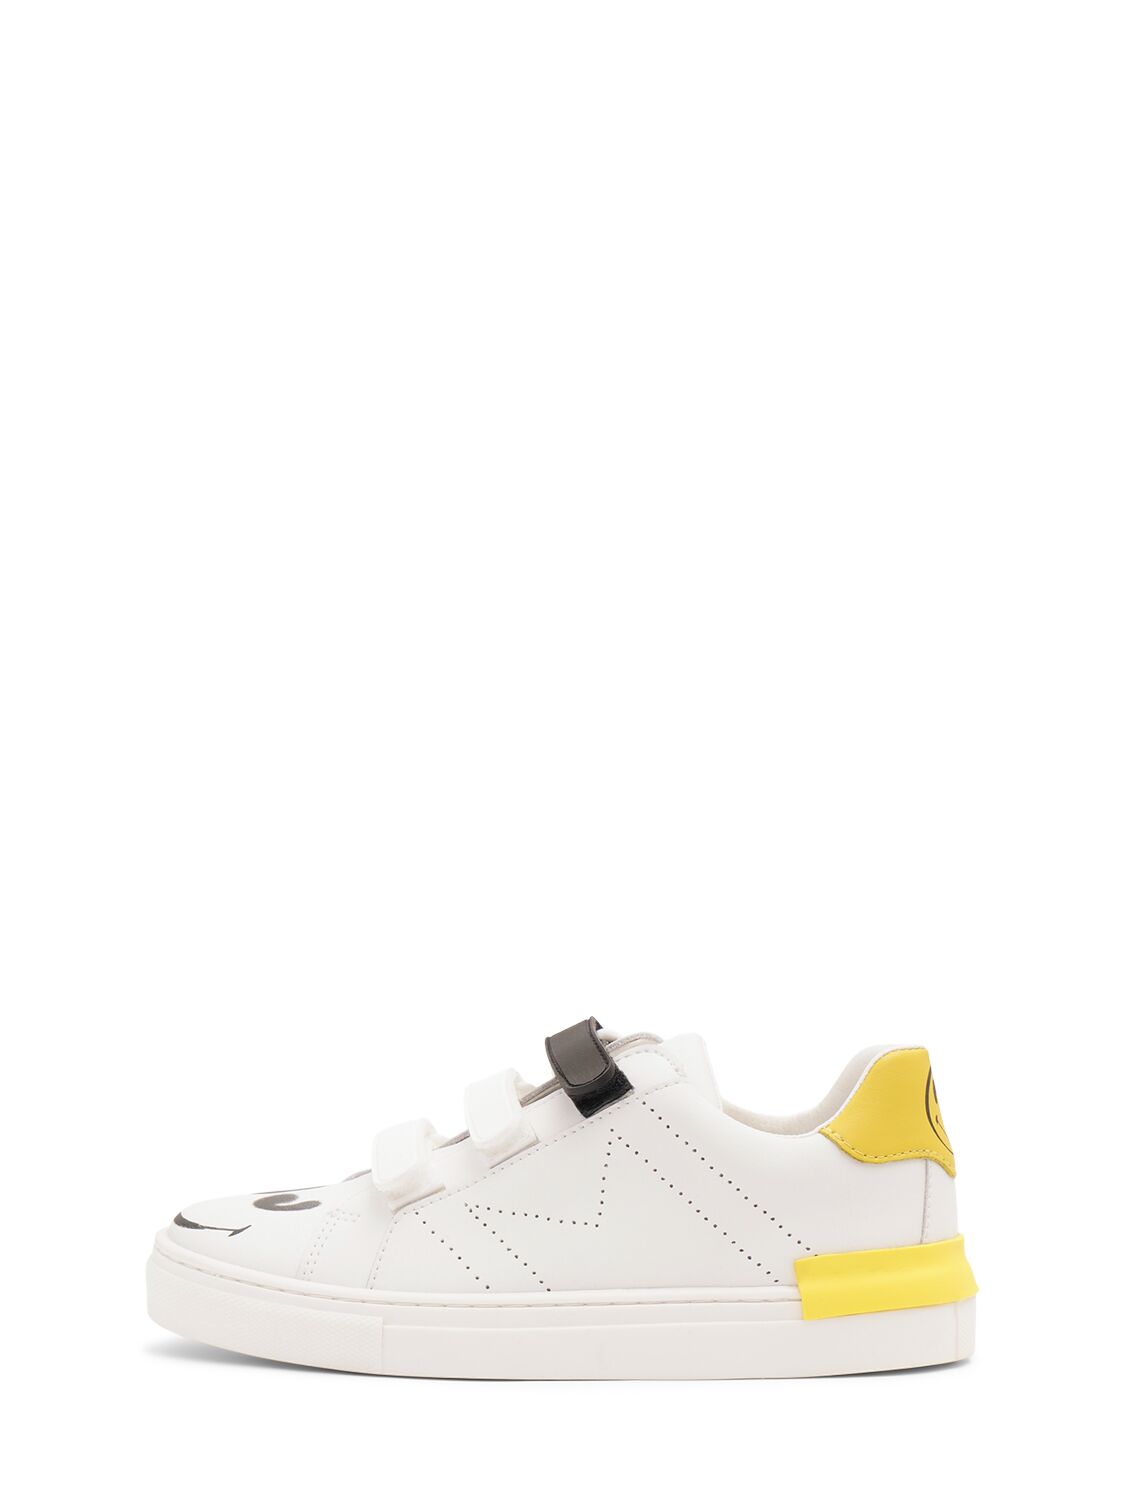 Marc Jacobs Kids' Smileyworld Leather Sneakers In White